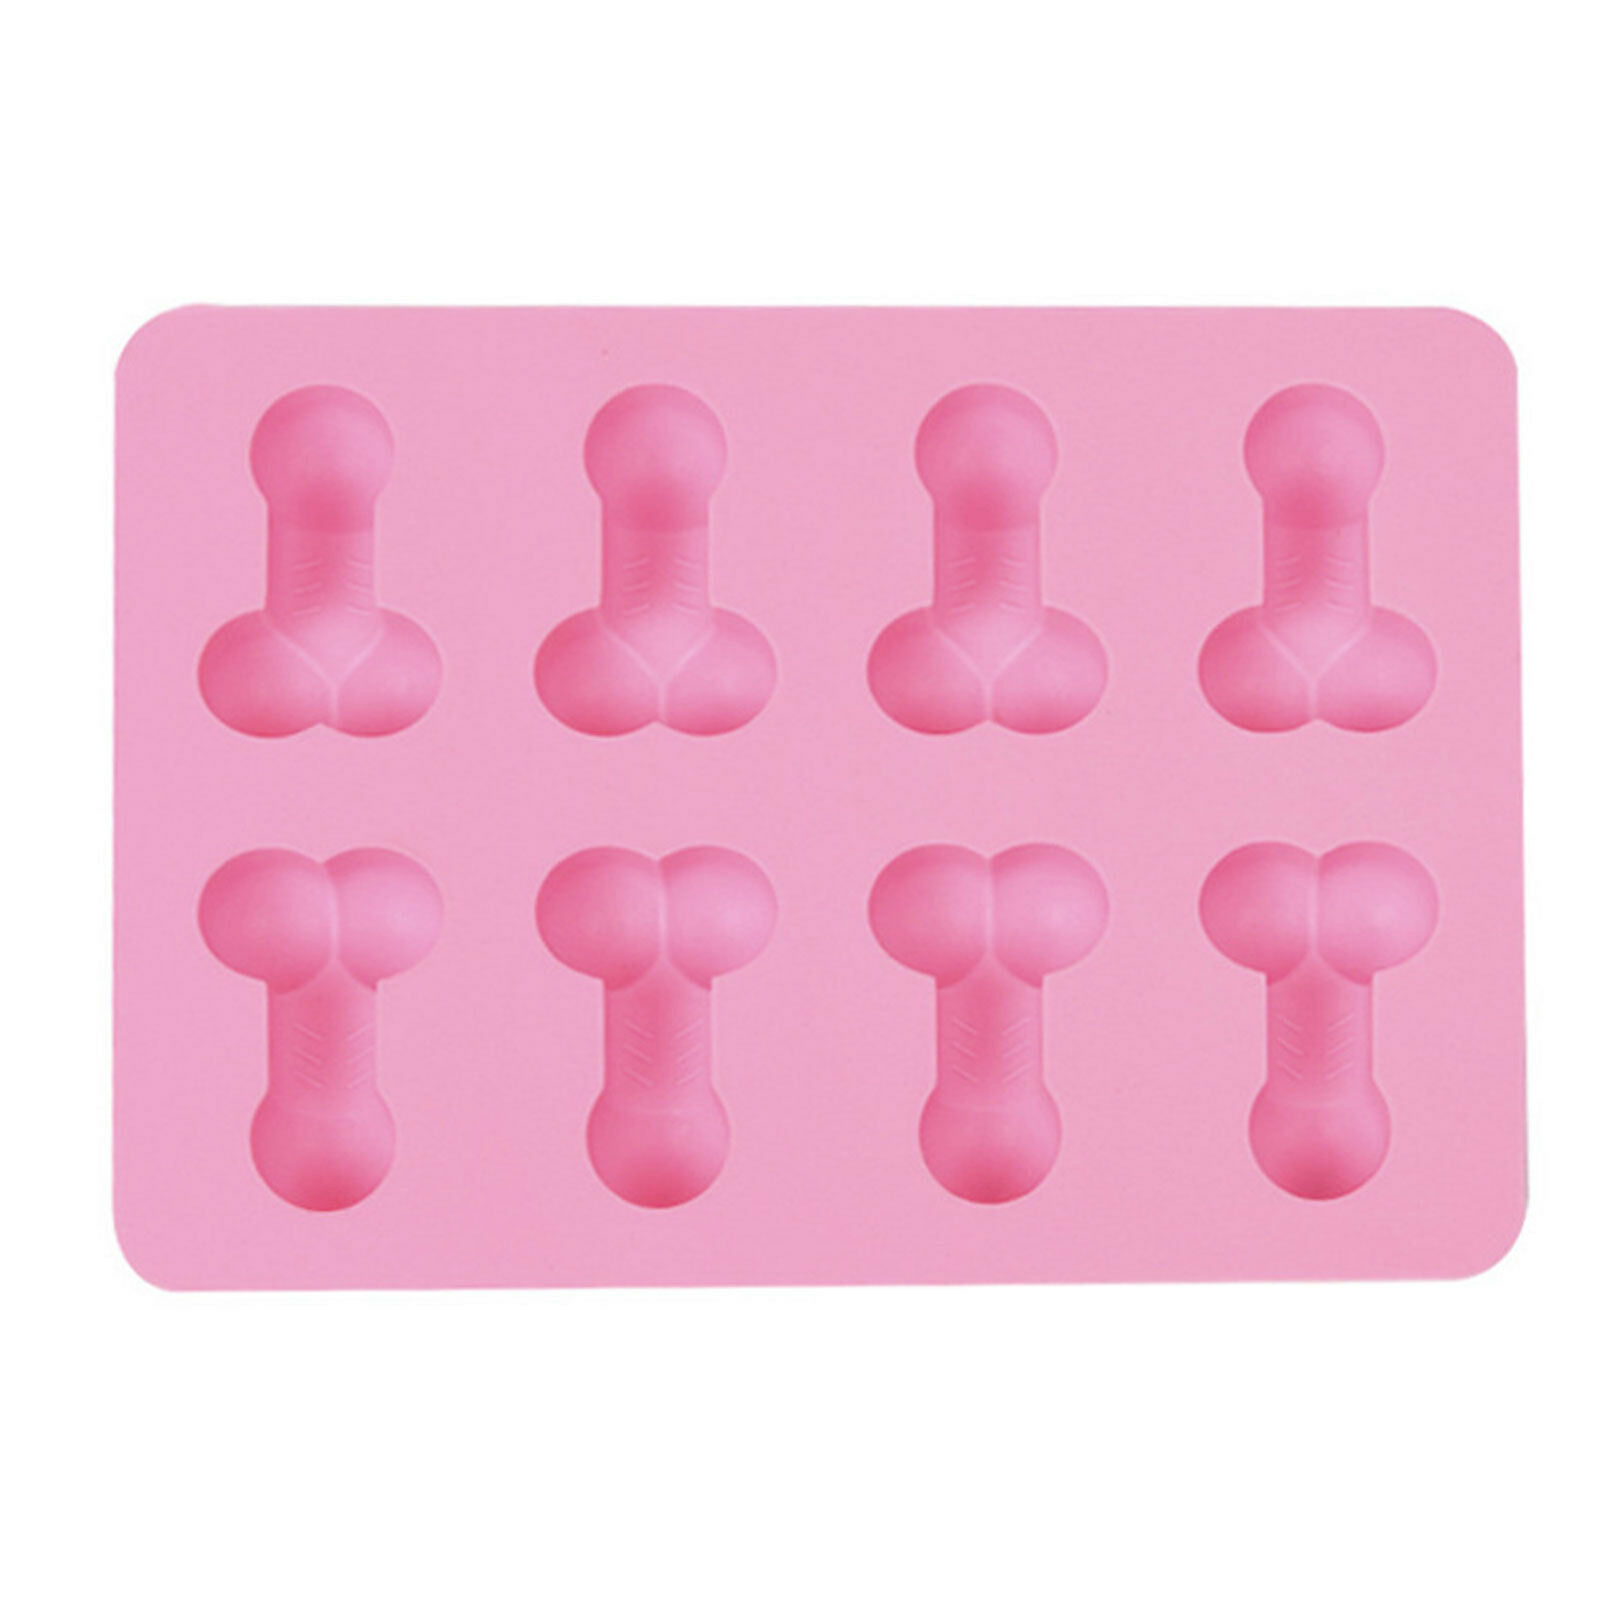 Hens Party Penis Willy Dick Silicone Ice Tray Chocolate Cake Jelly Mould Party Bestbuy Online